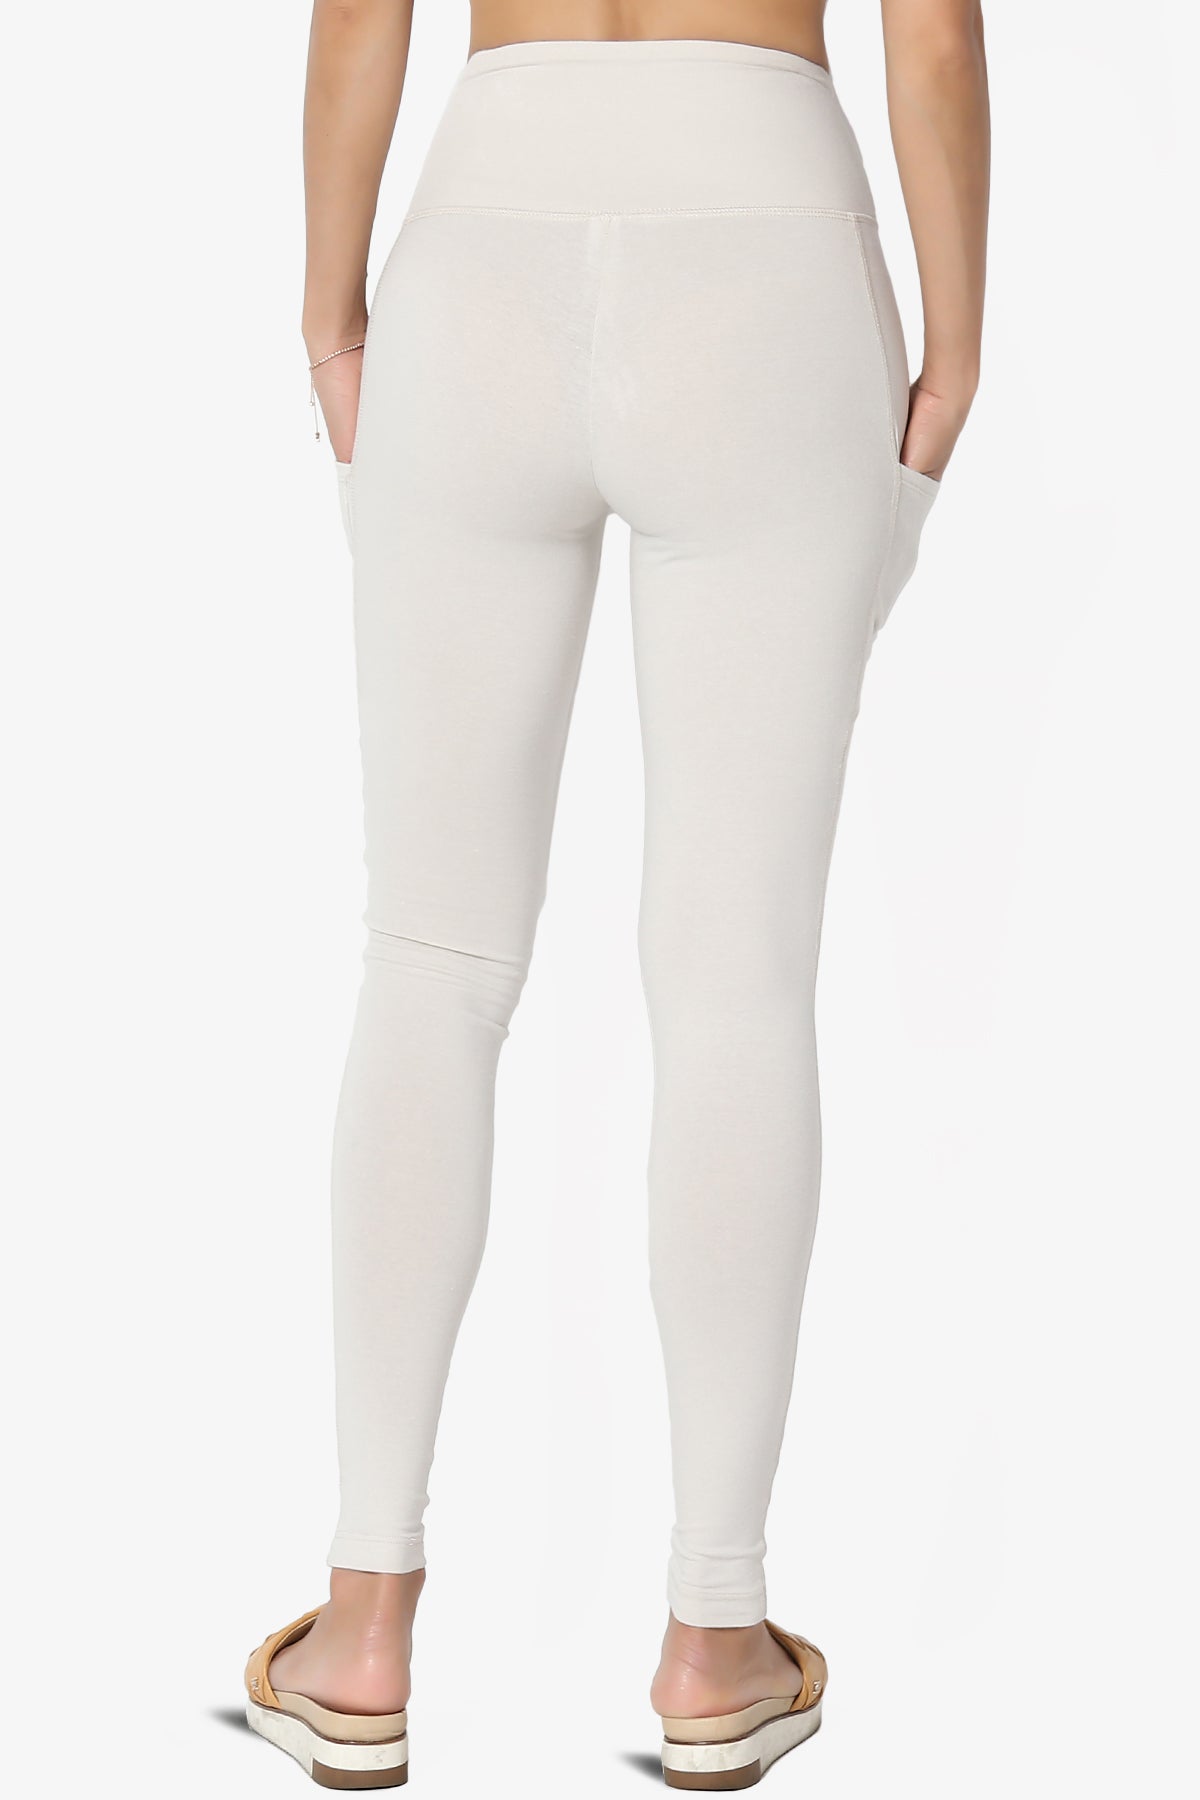 Ansley Luxe Cotton Leggings with Pockets BONE_2